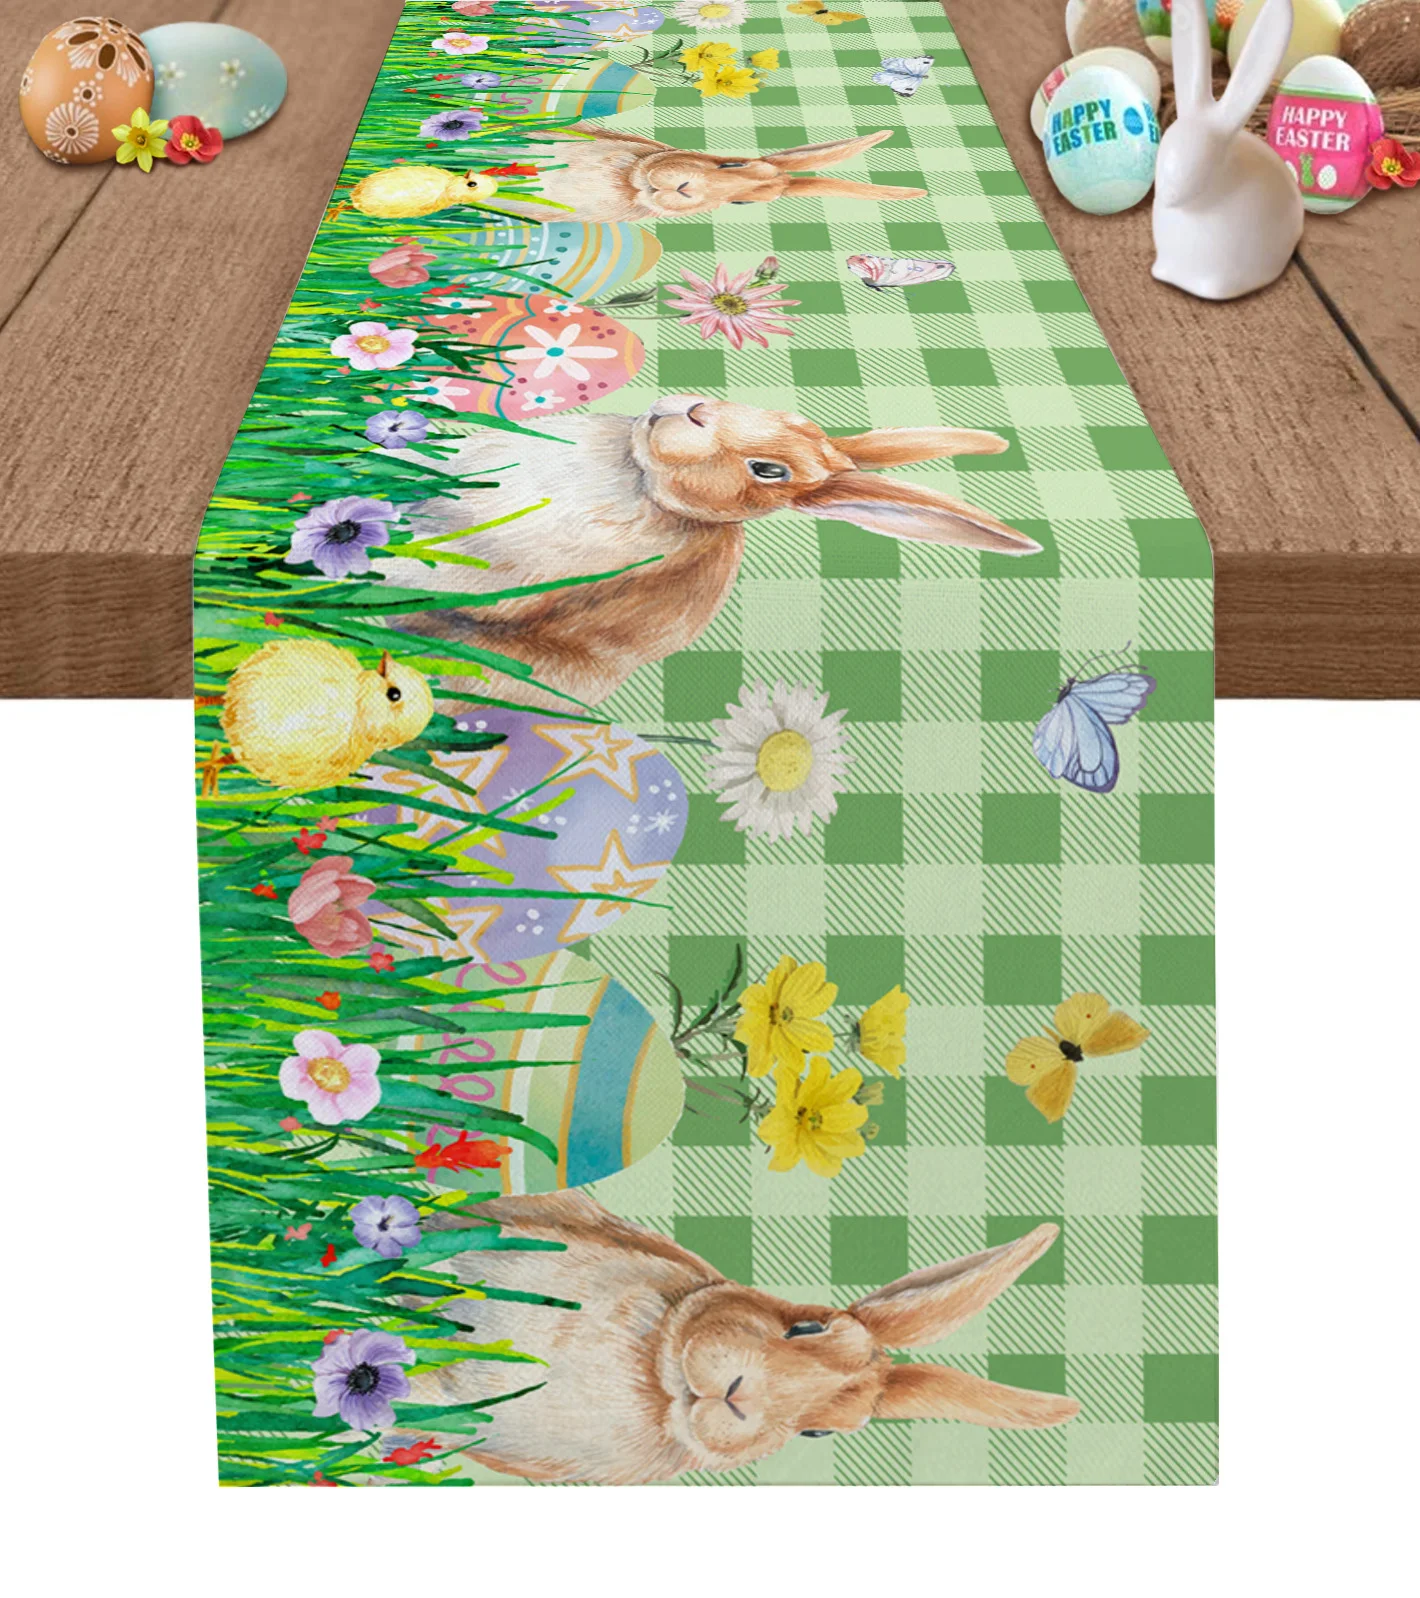 

Easter Bunny Eggs Table Runner Wedding Festival Table Decoration Home Decor Kitchen Table Runners Placemats